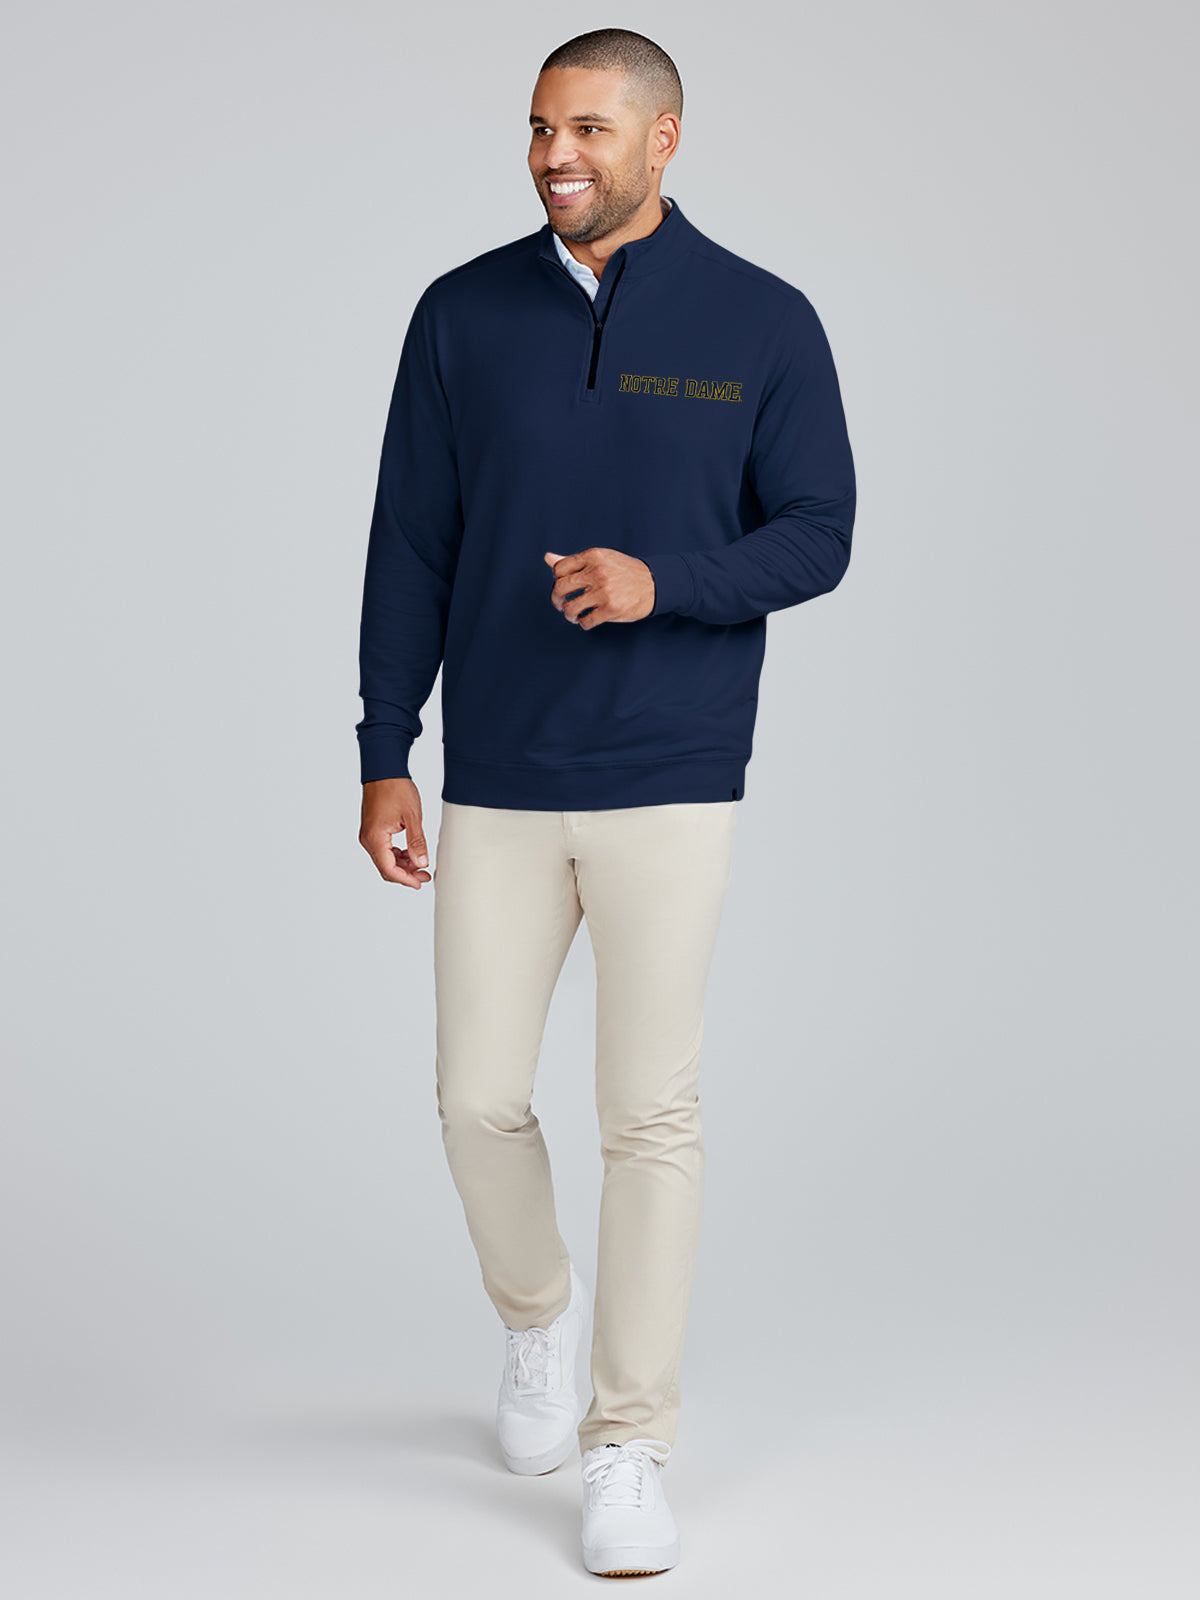 Cloud French Terry Quarter Zip - Notre Dame - tasc Performance (ClassicNavy)